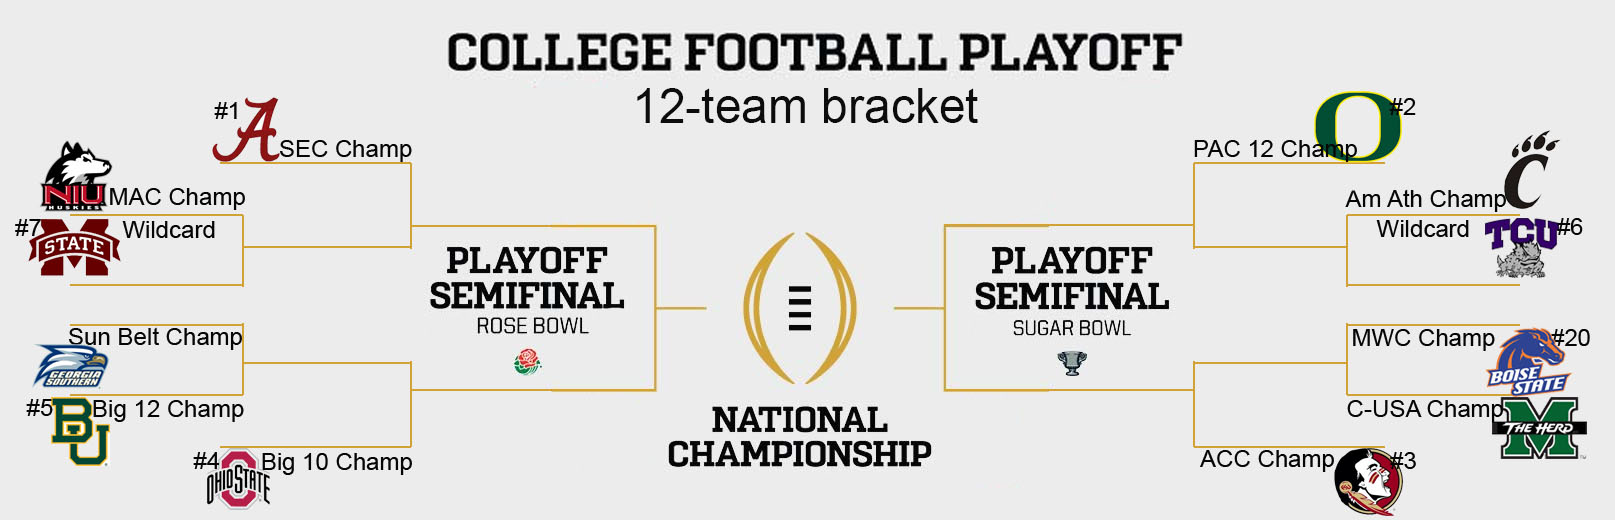 The expanded college football playoff that wasn't: A fantasy bracket